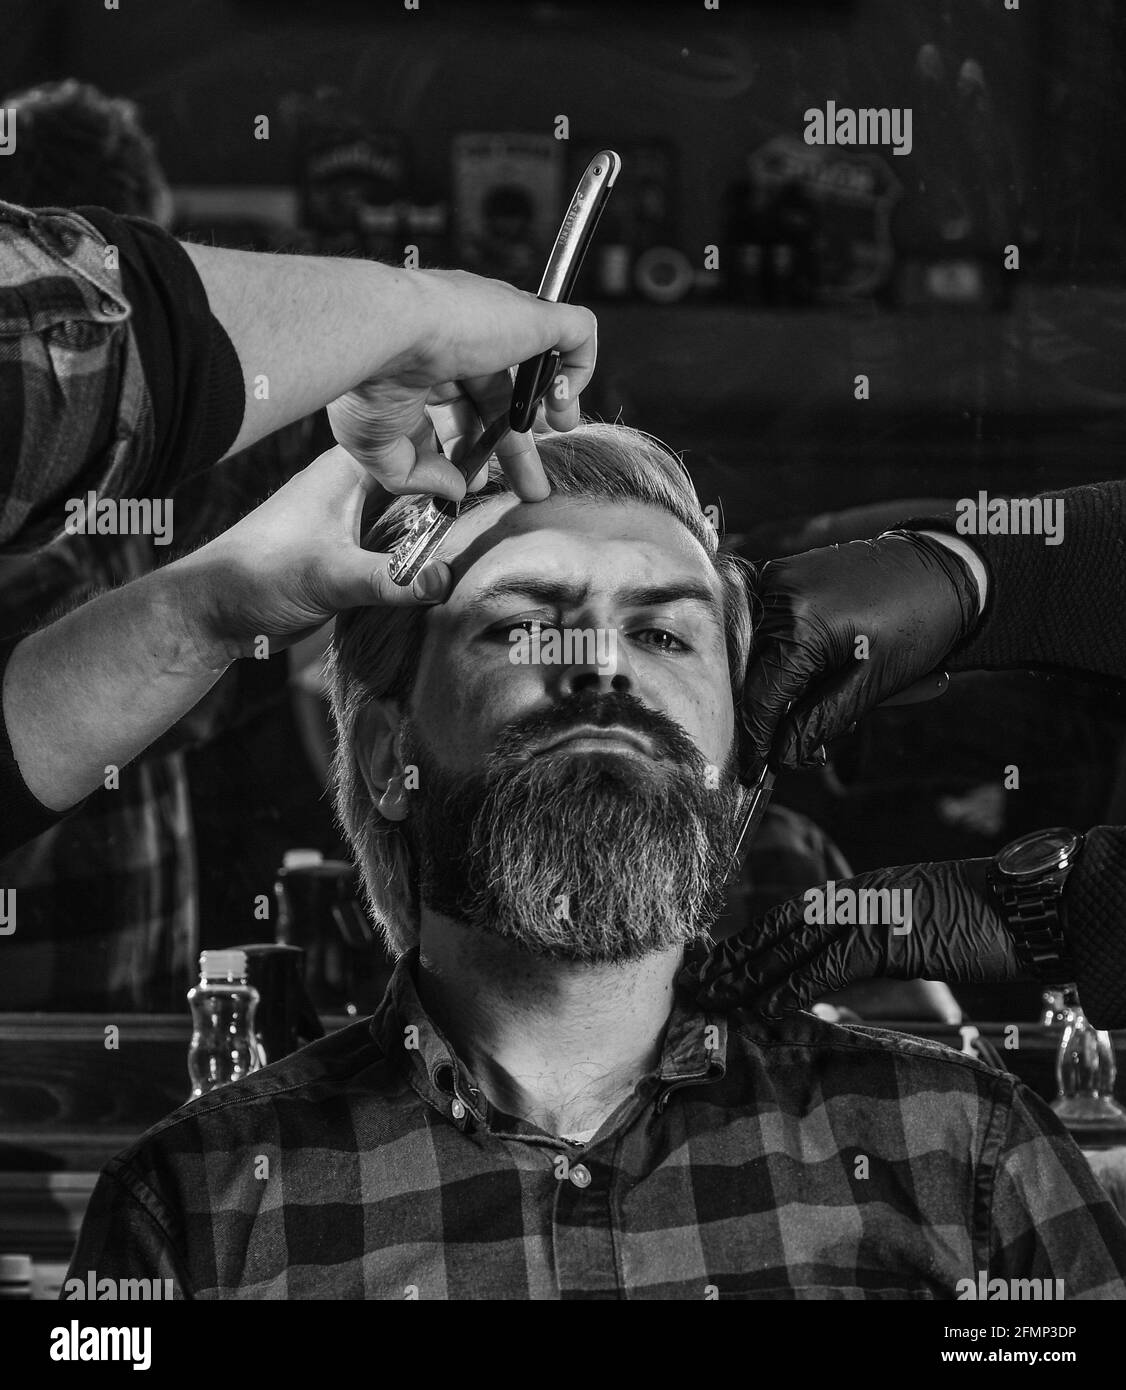 Man at hairdresser salon. Mastered craft from cutting hair every day. Visit  hairdresser. Maintaining shape. Barbershop client. Shaving facial hair  Stock Photo - Alamy